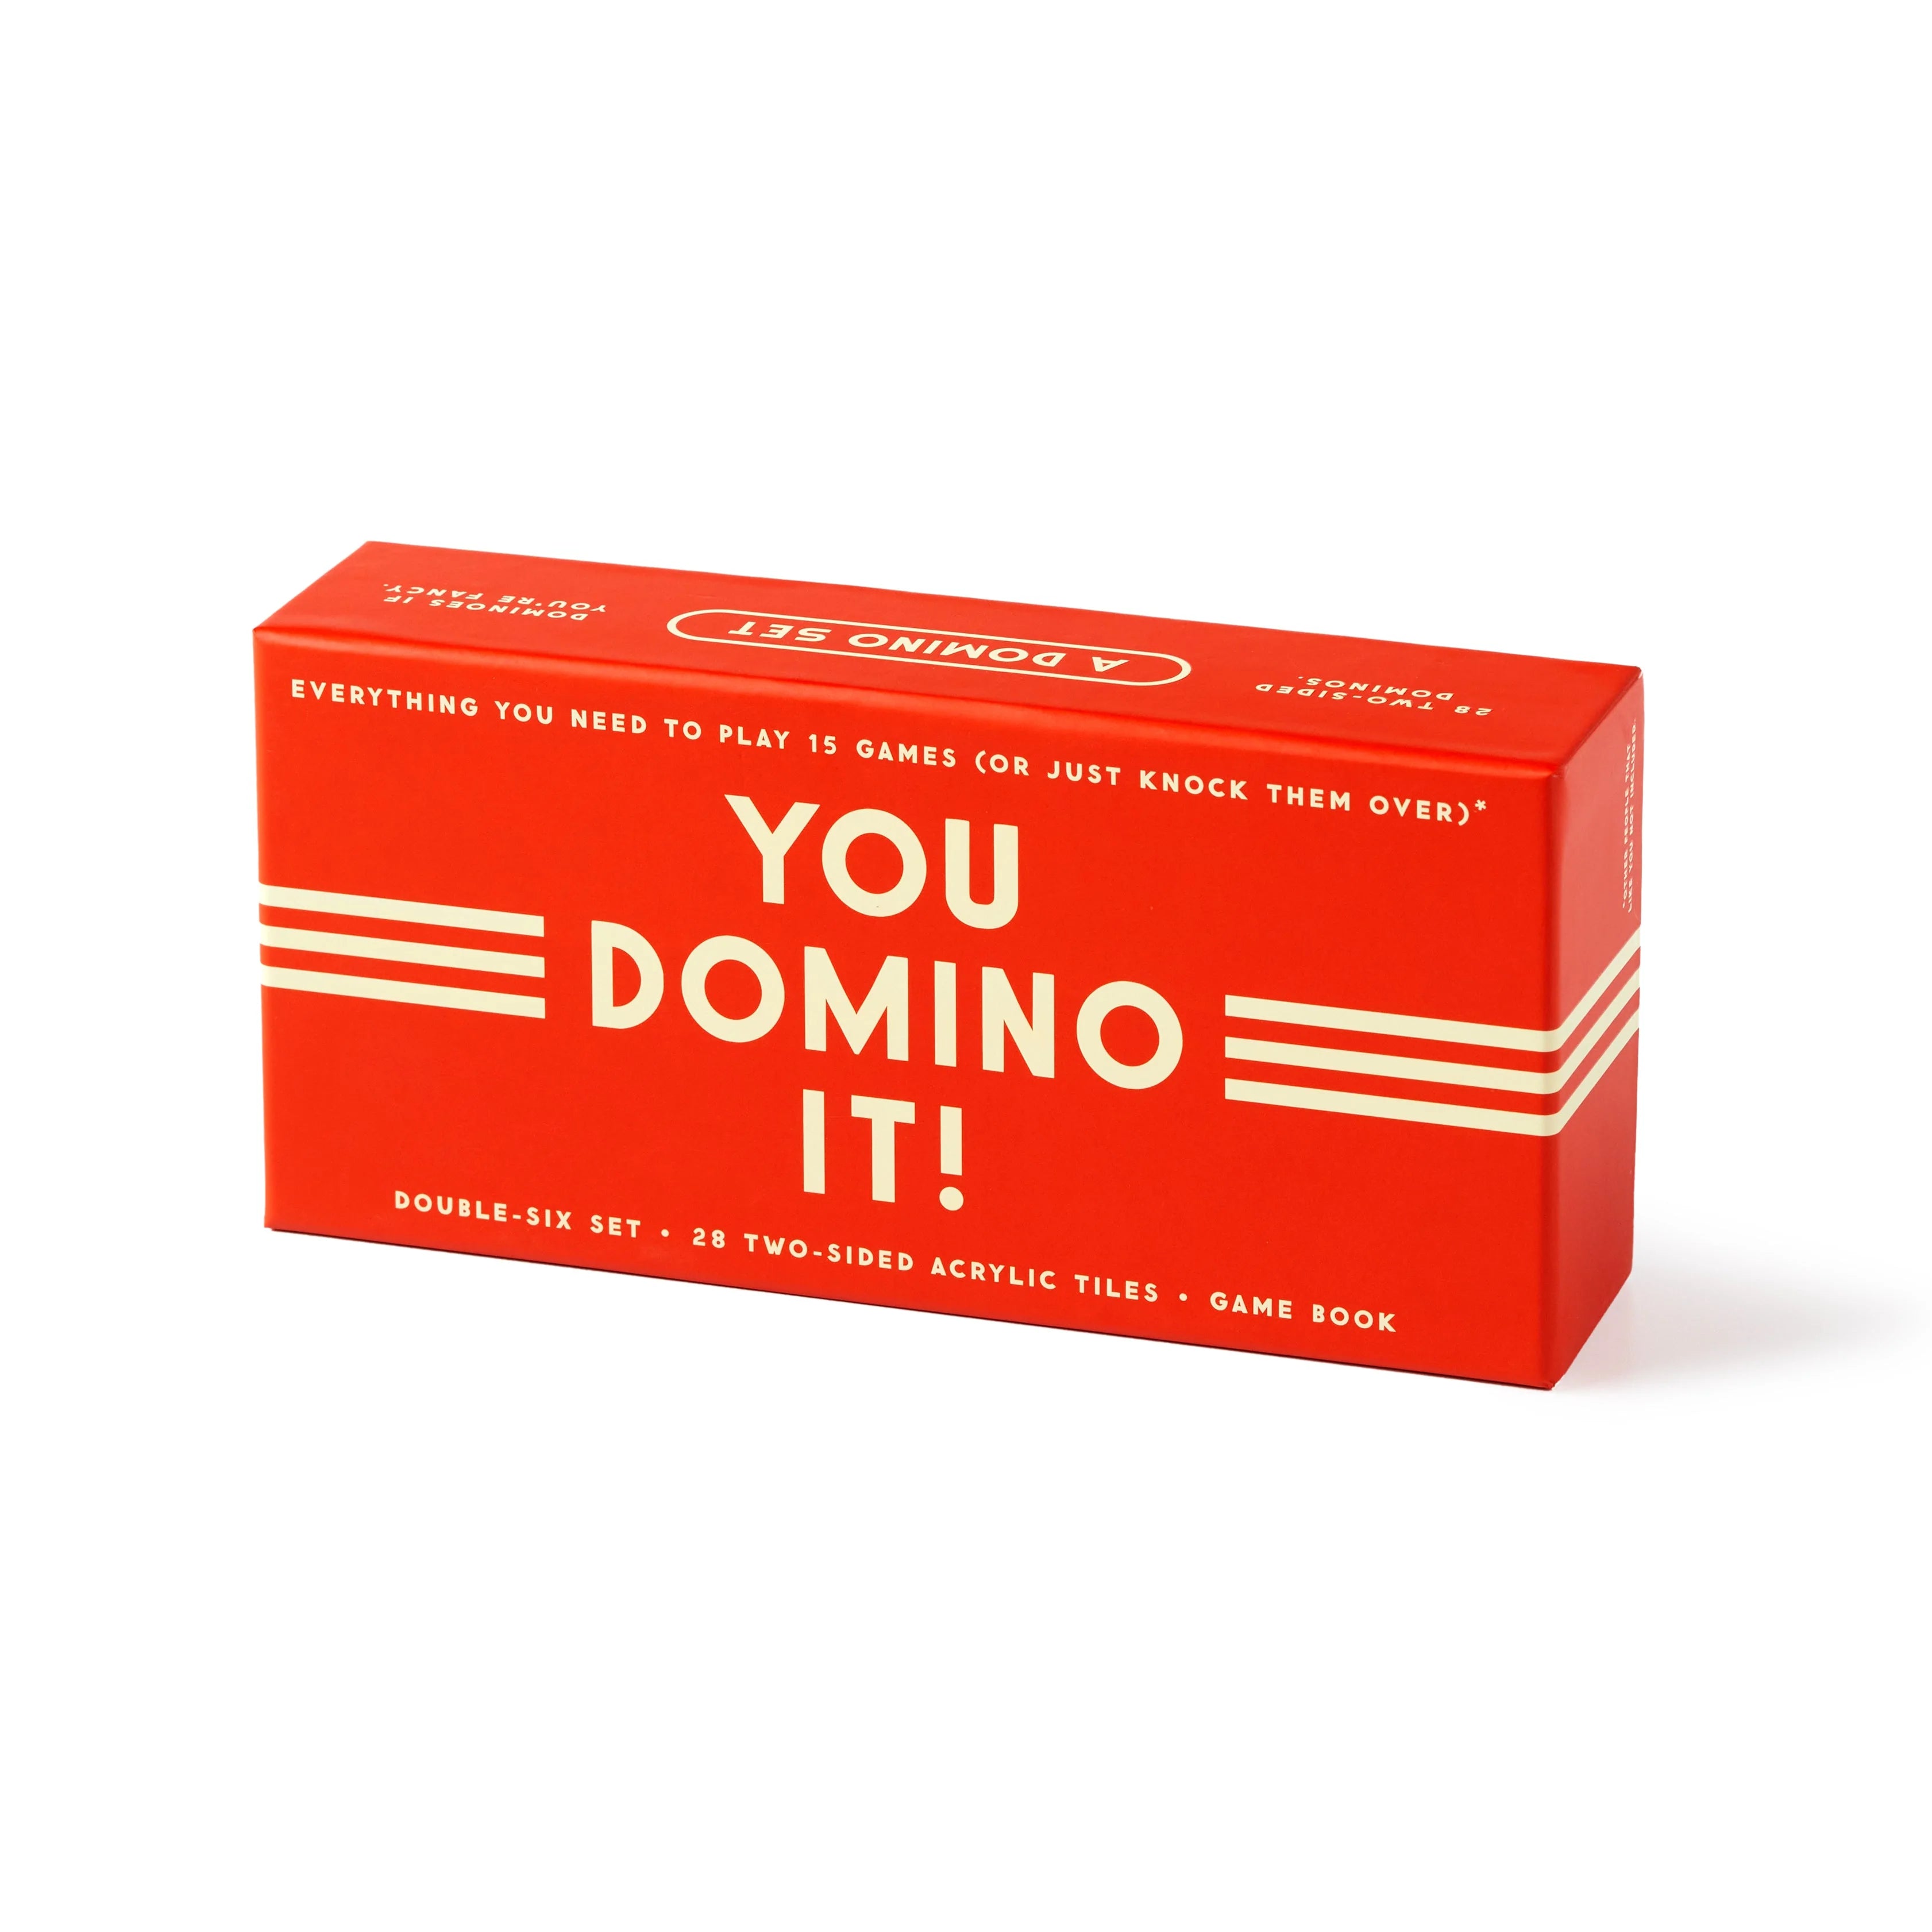 You Domino It! Game Set by Brass Monkey Goods. Fun domino game. Party game with dominos. Game set with dominos. 15 domino game set. Games to play with friends. Family game night. Family memories games.